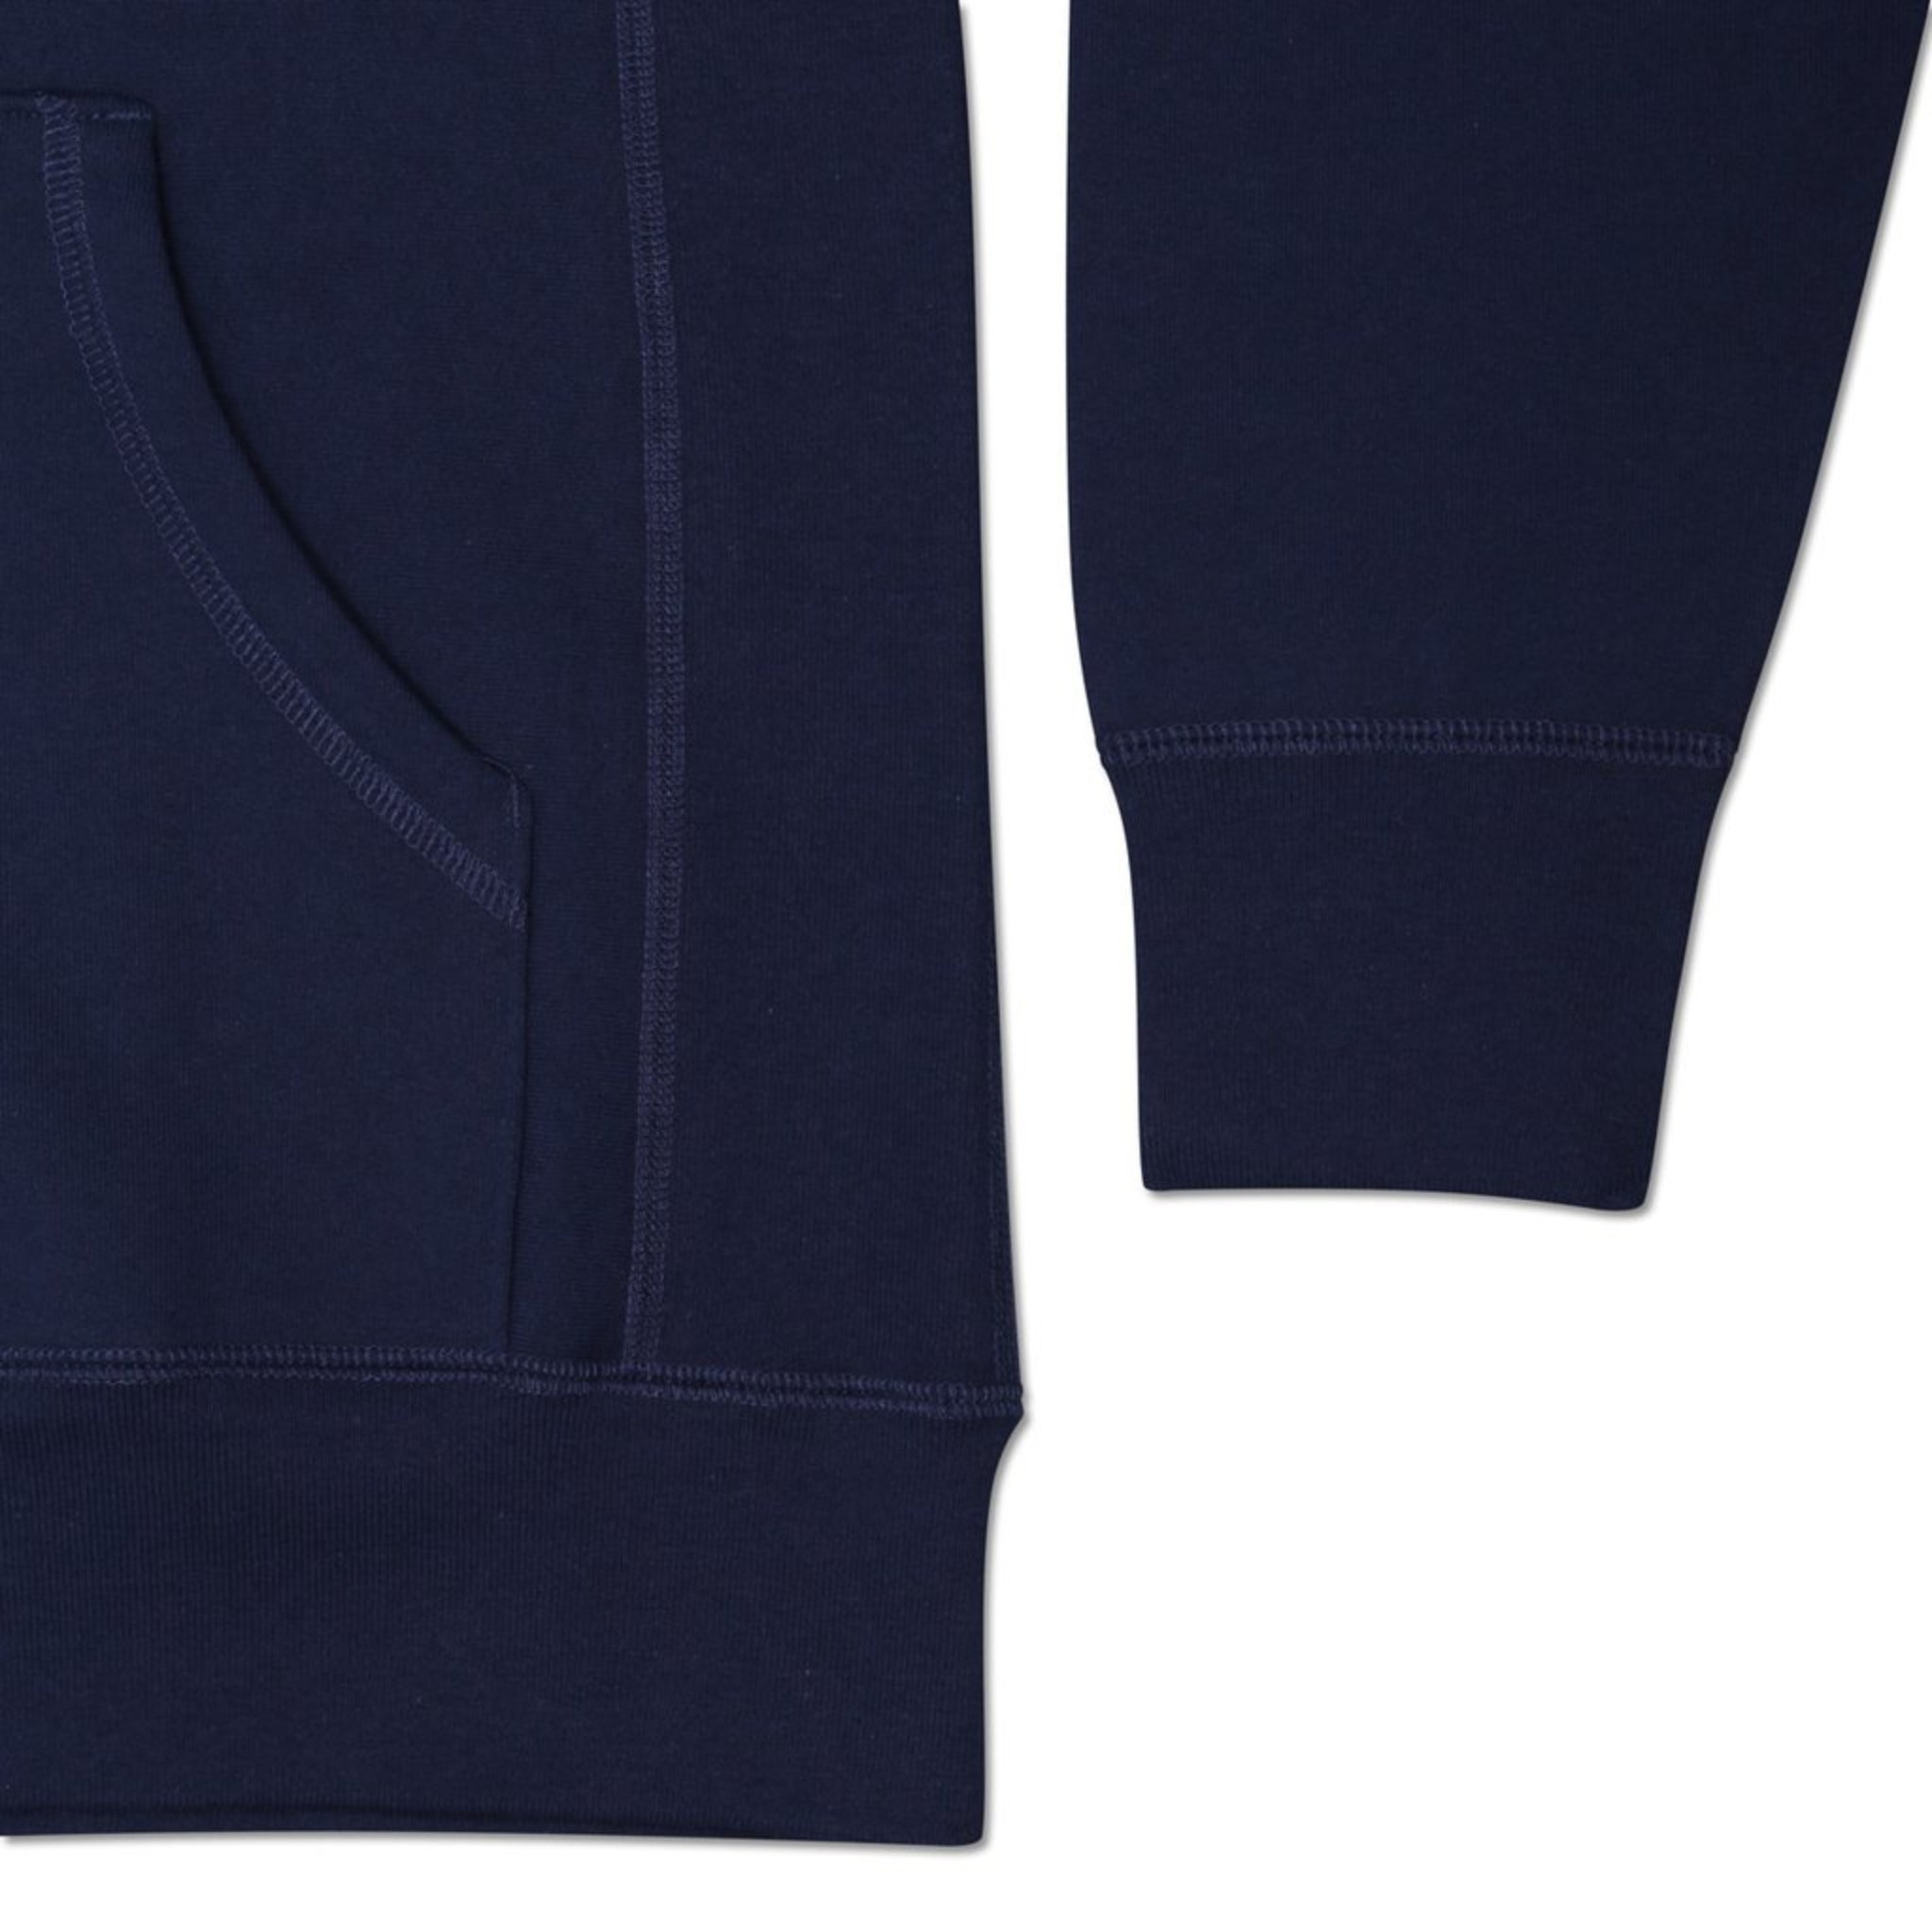 close up view of sleeve details on heavyweight zip hoodie in navy cotton on a white background